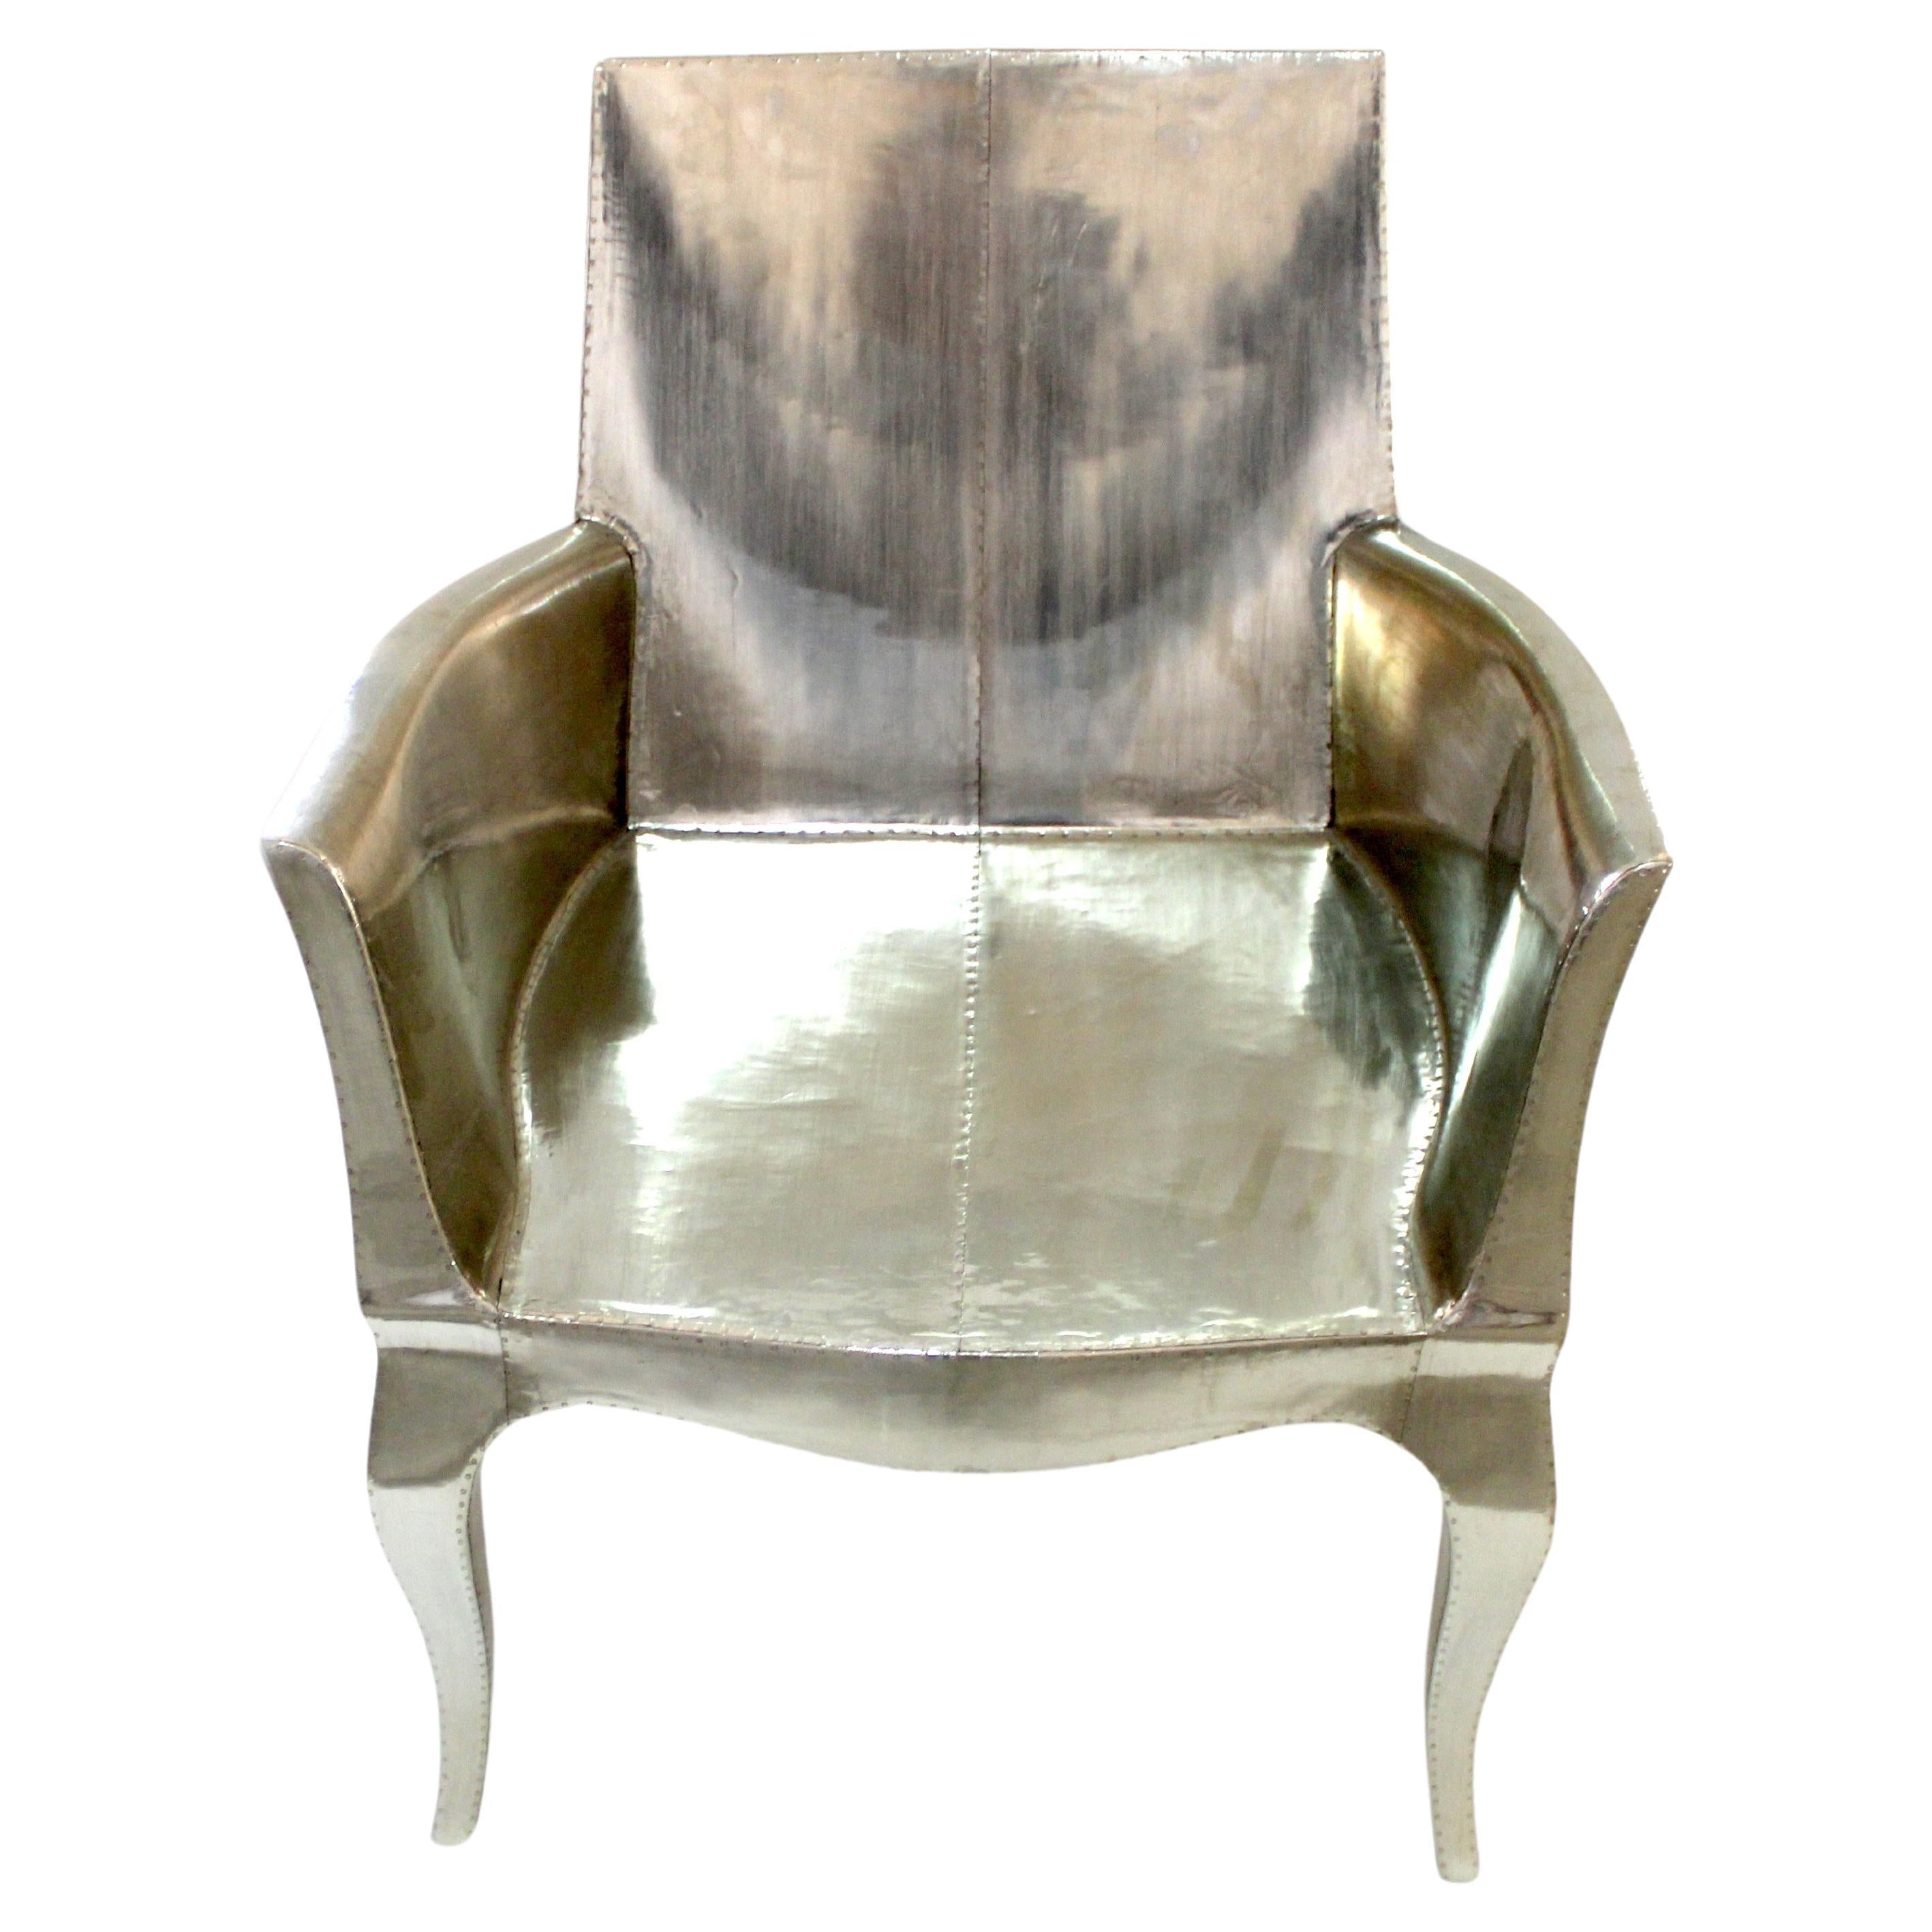 Art Deco Desk Chair in Smooth White Bronze by Paul Mathieu for S. Odegard For Sale